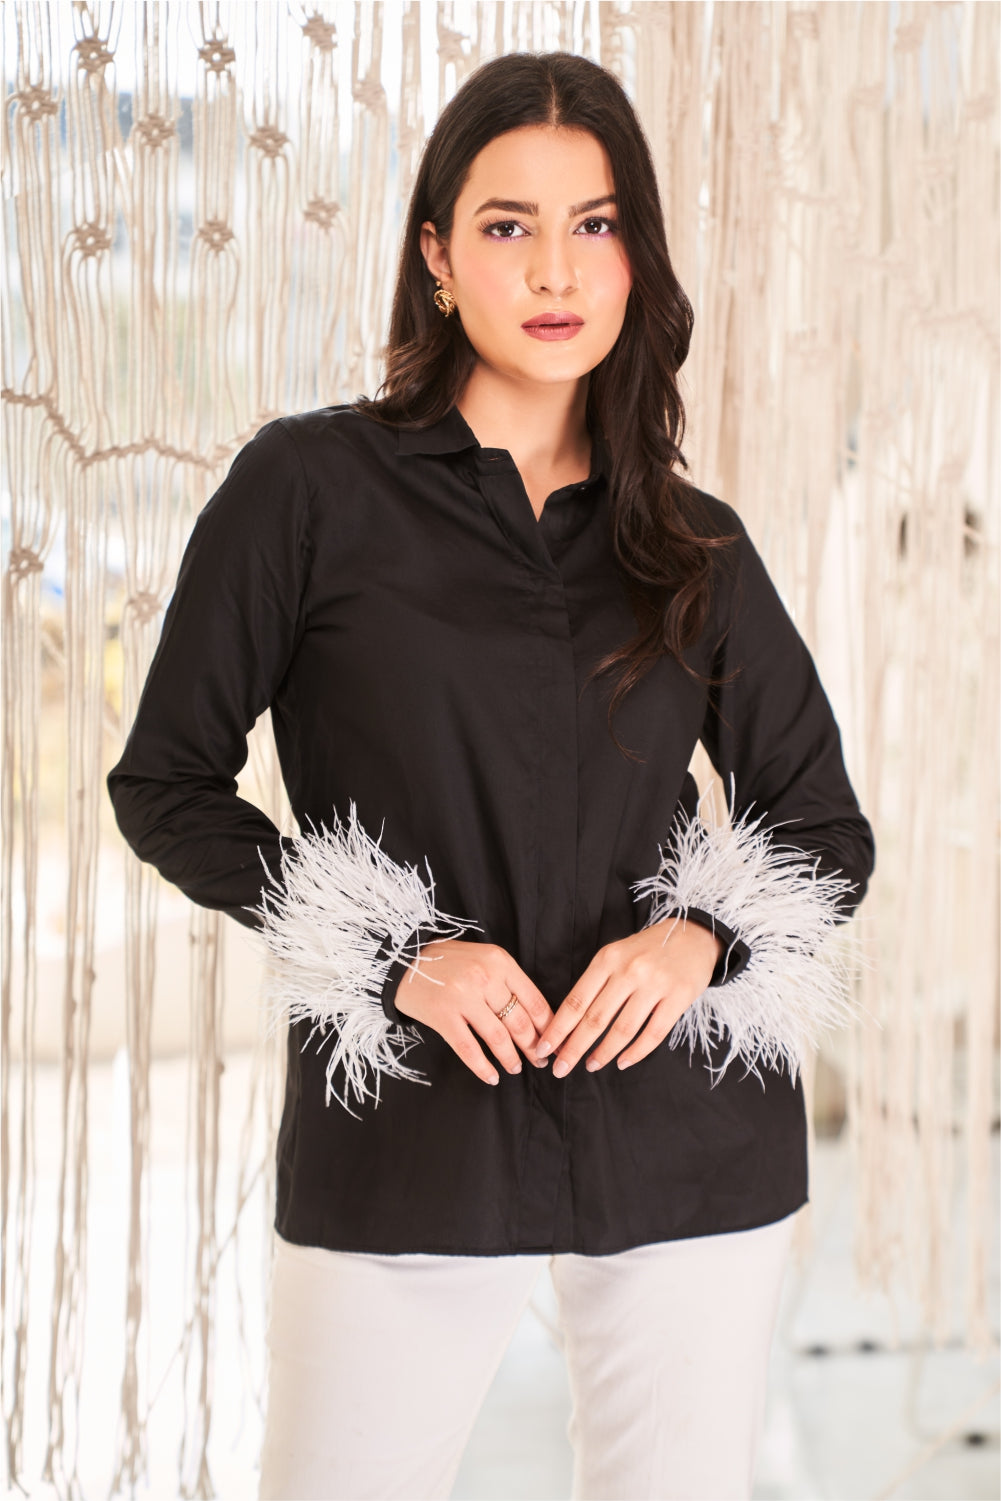 Black Shirt With Feathered Sleeves